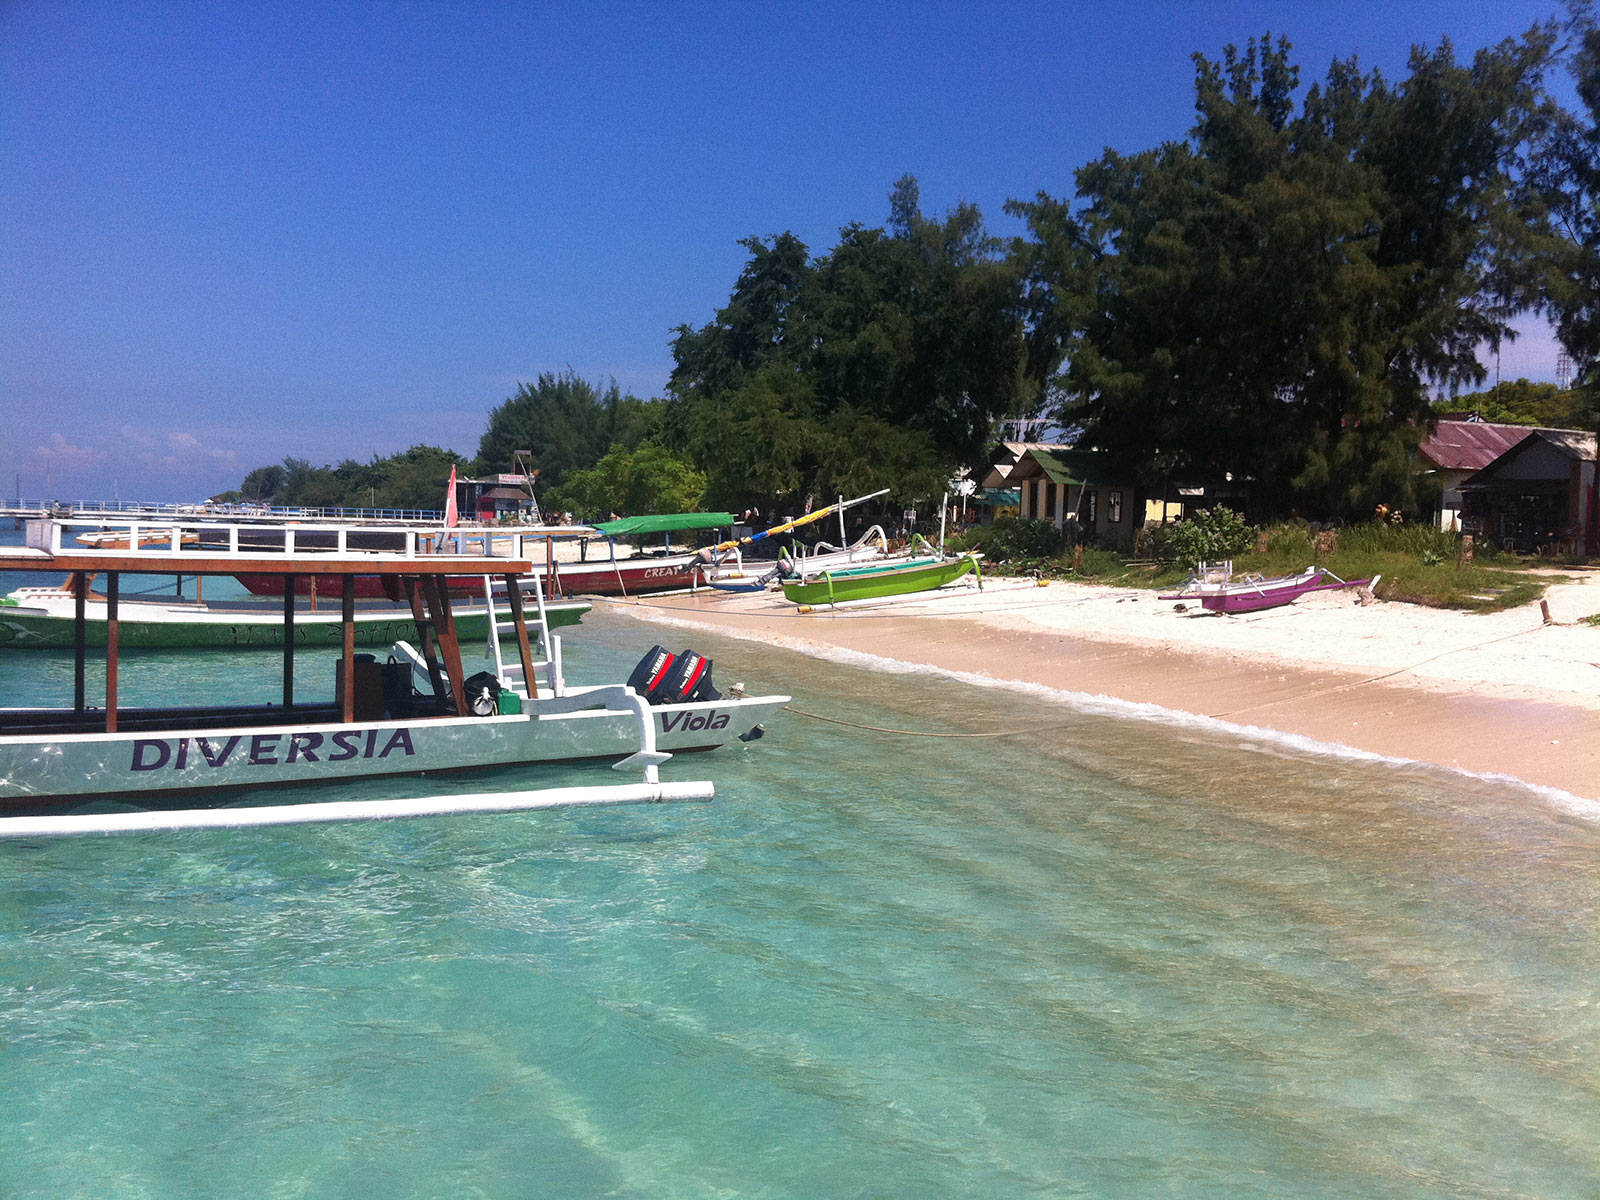 Beach in Gili T. My first taste of Asia